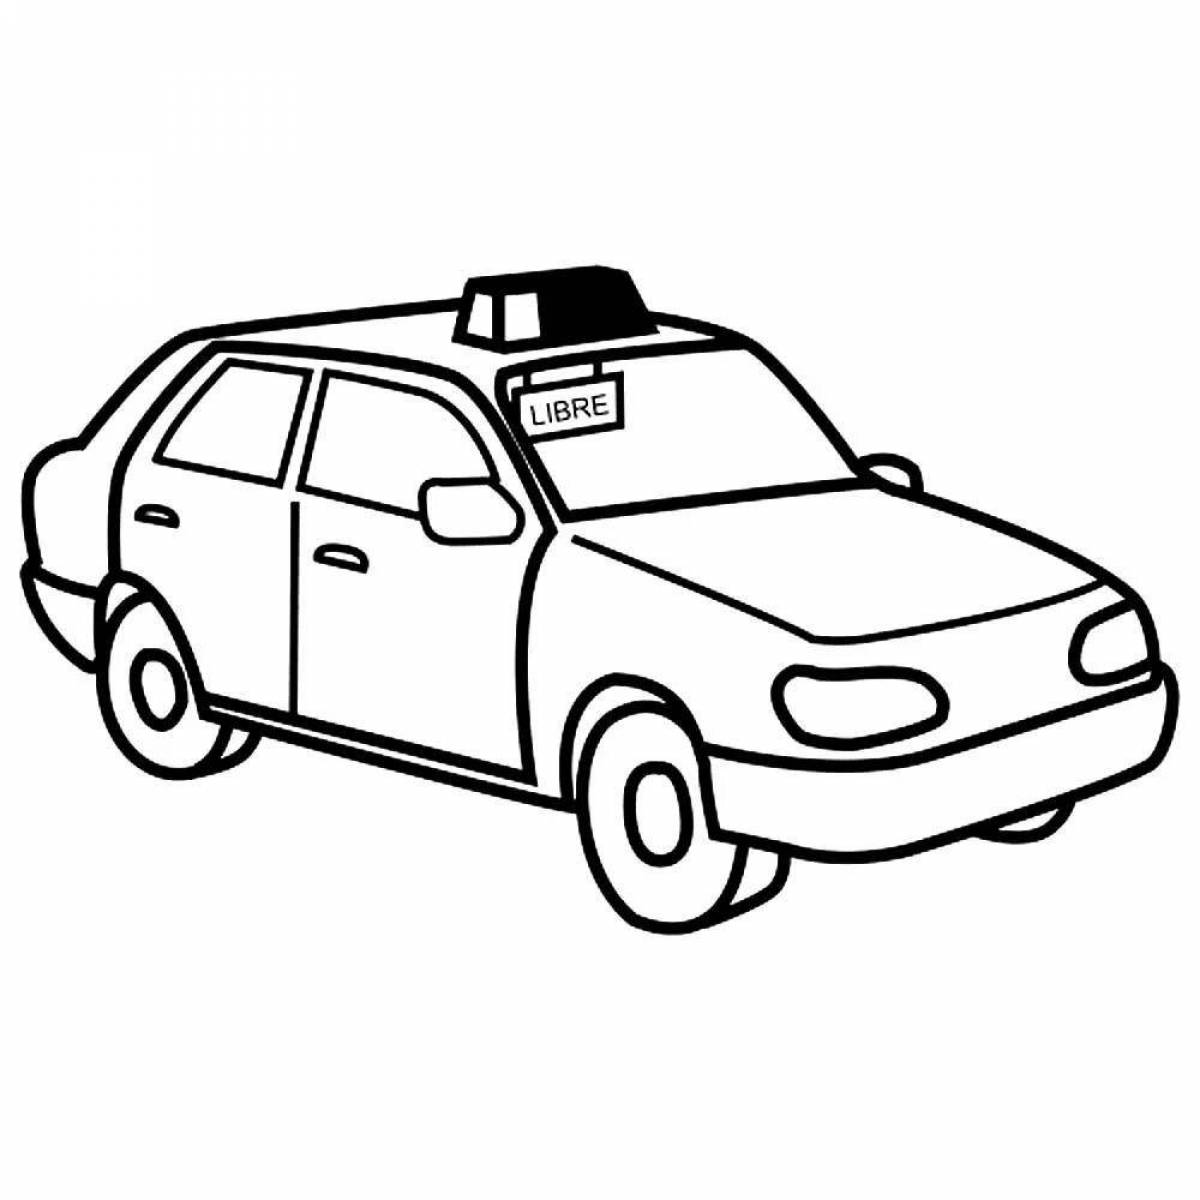 Coloring pages joyful taxi for kids